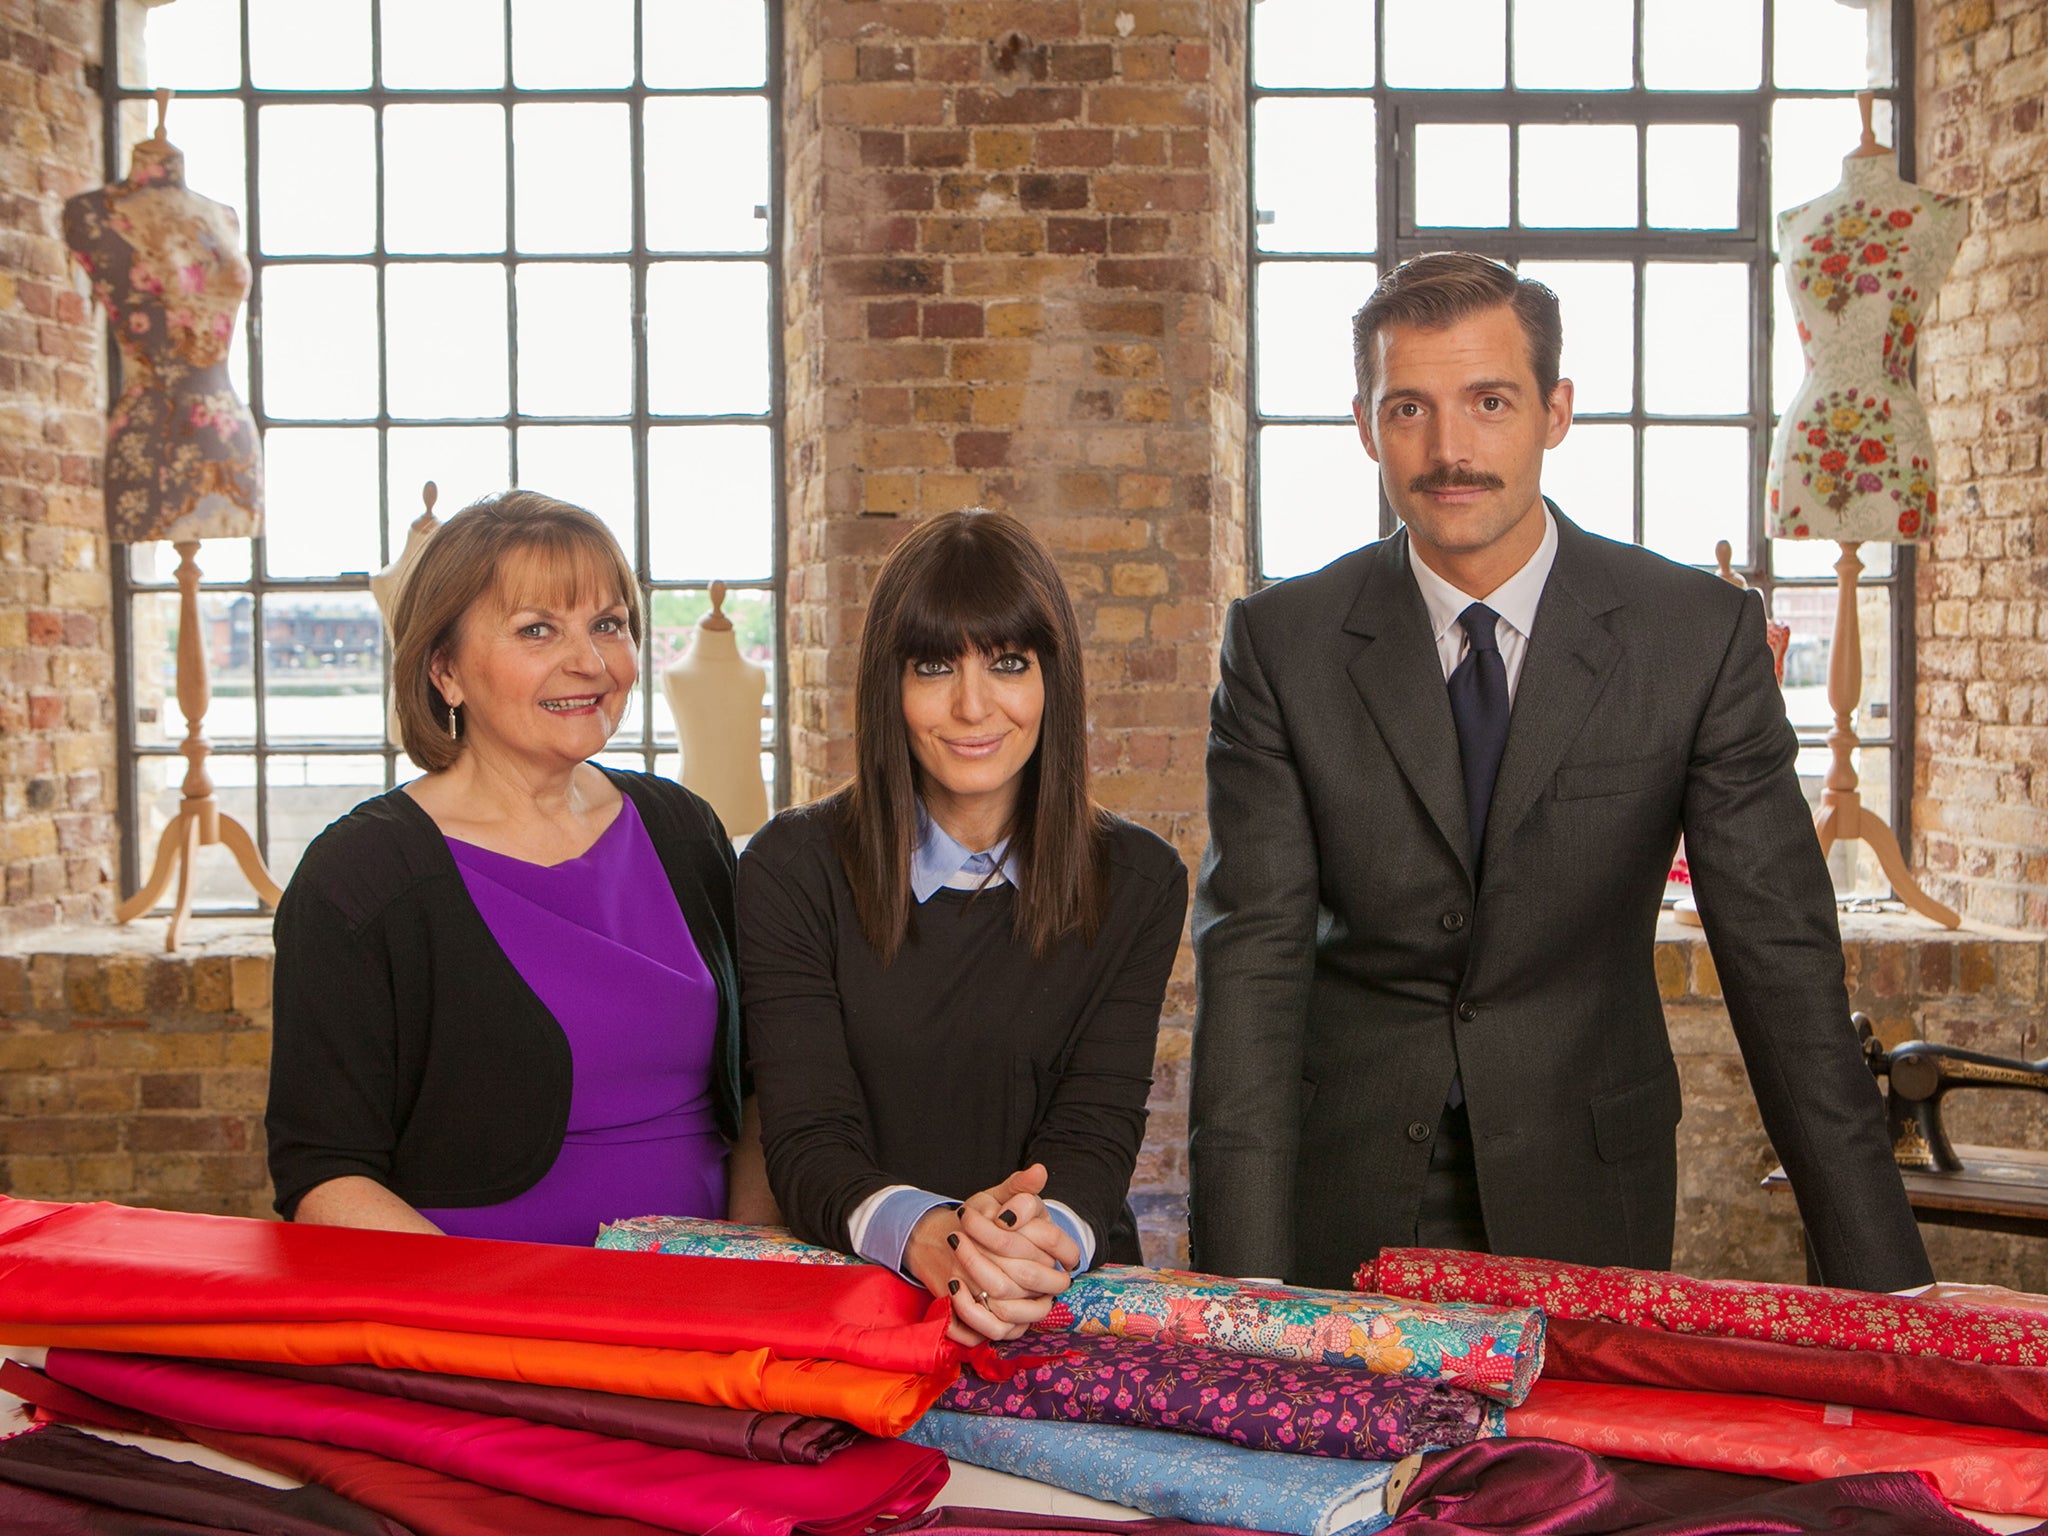 Material world: May Martin, Claudia Winkleman and Patrick Grant in ‘The Great British Sewing Bee’